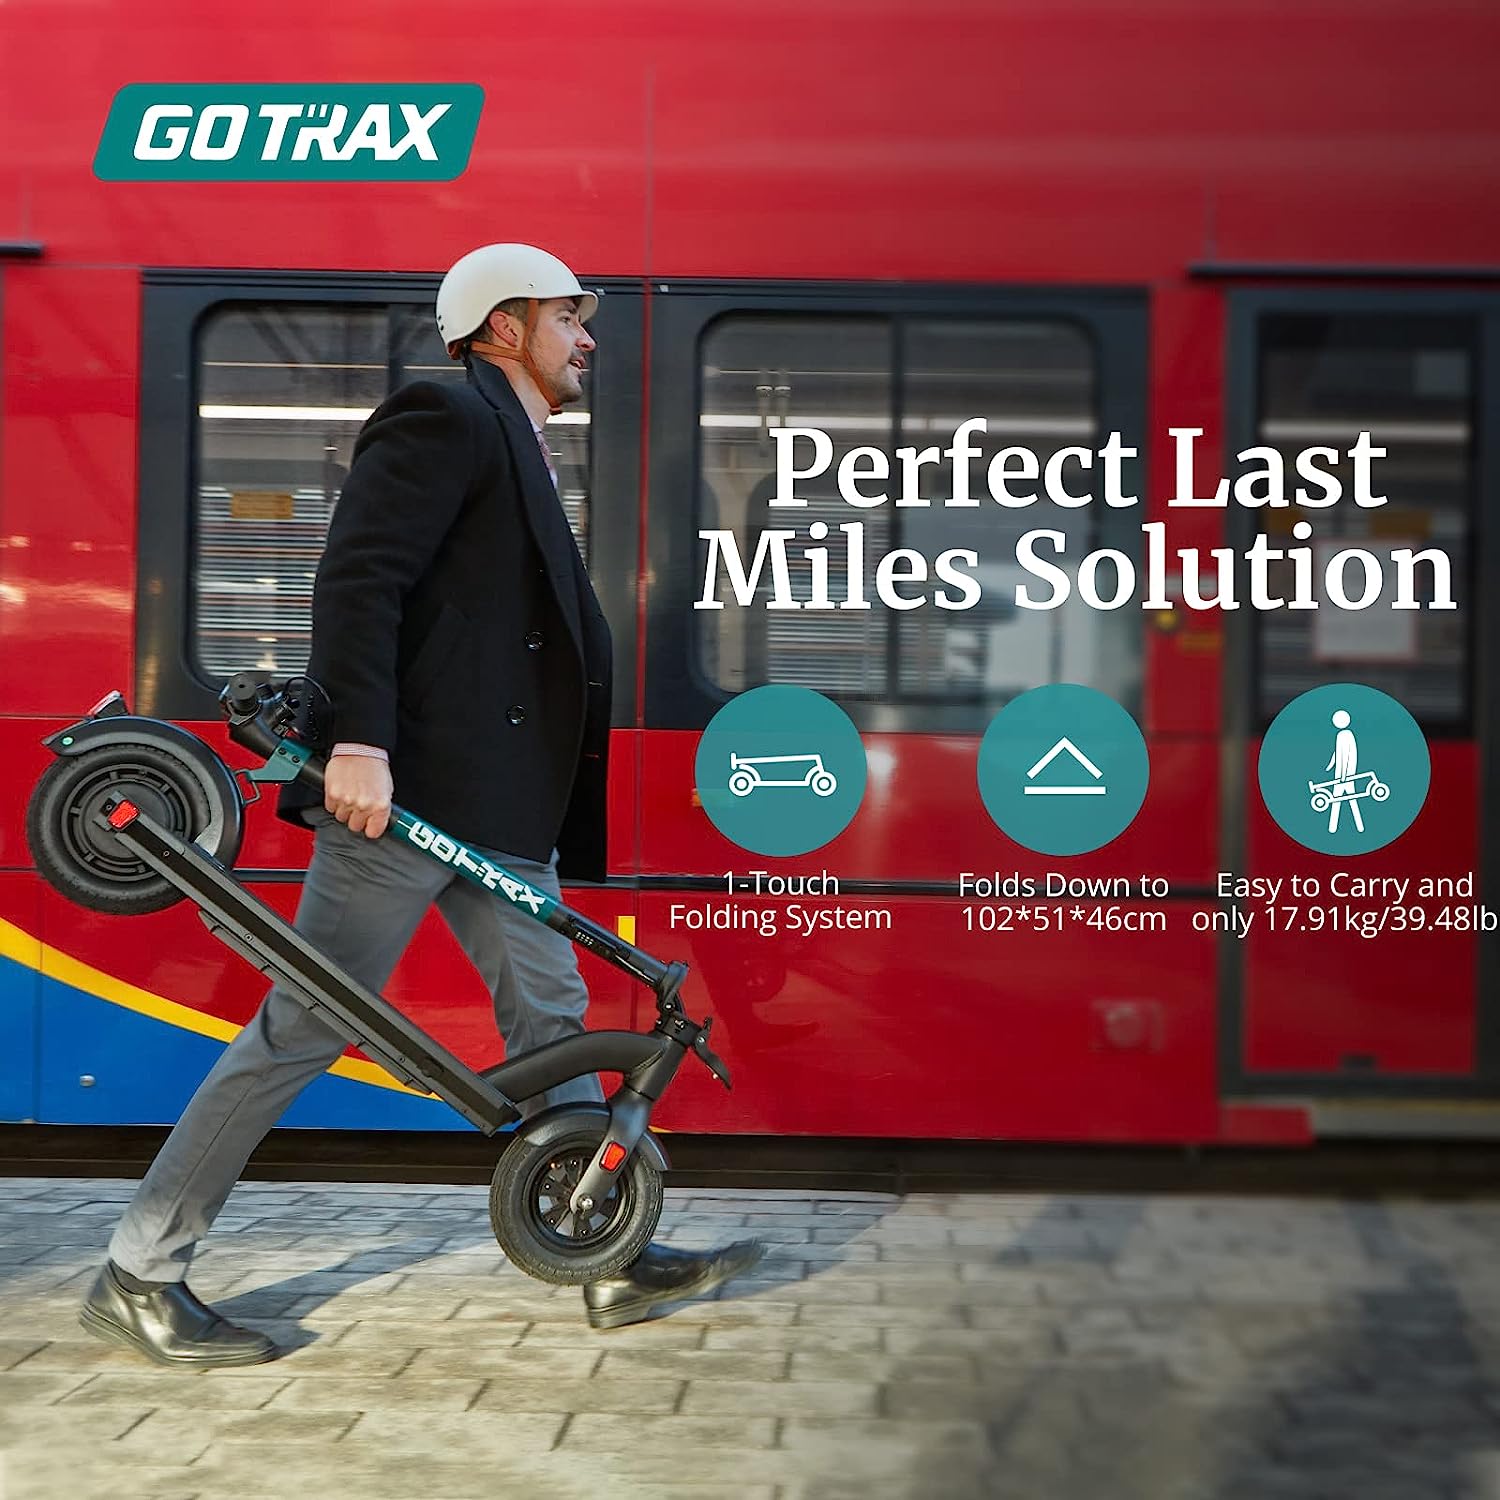 Gotrax GMAX Ultra Performance Electric Scooter Foldable Plus Ambient Lights 10"-Max 72KM Range & 32KPH Max Speed